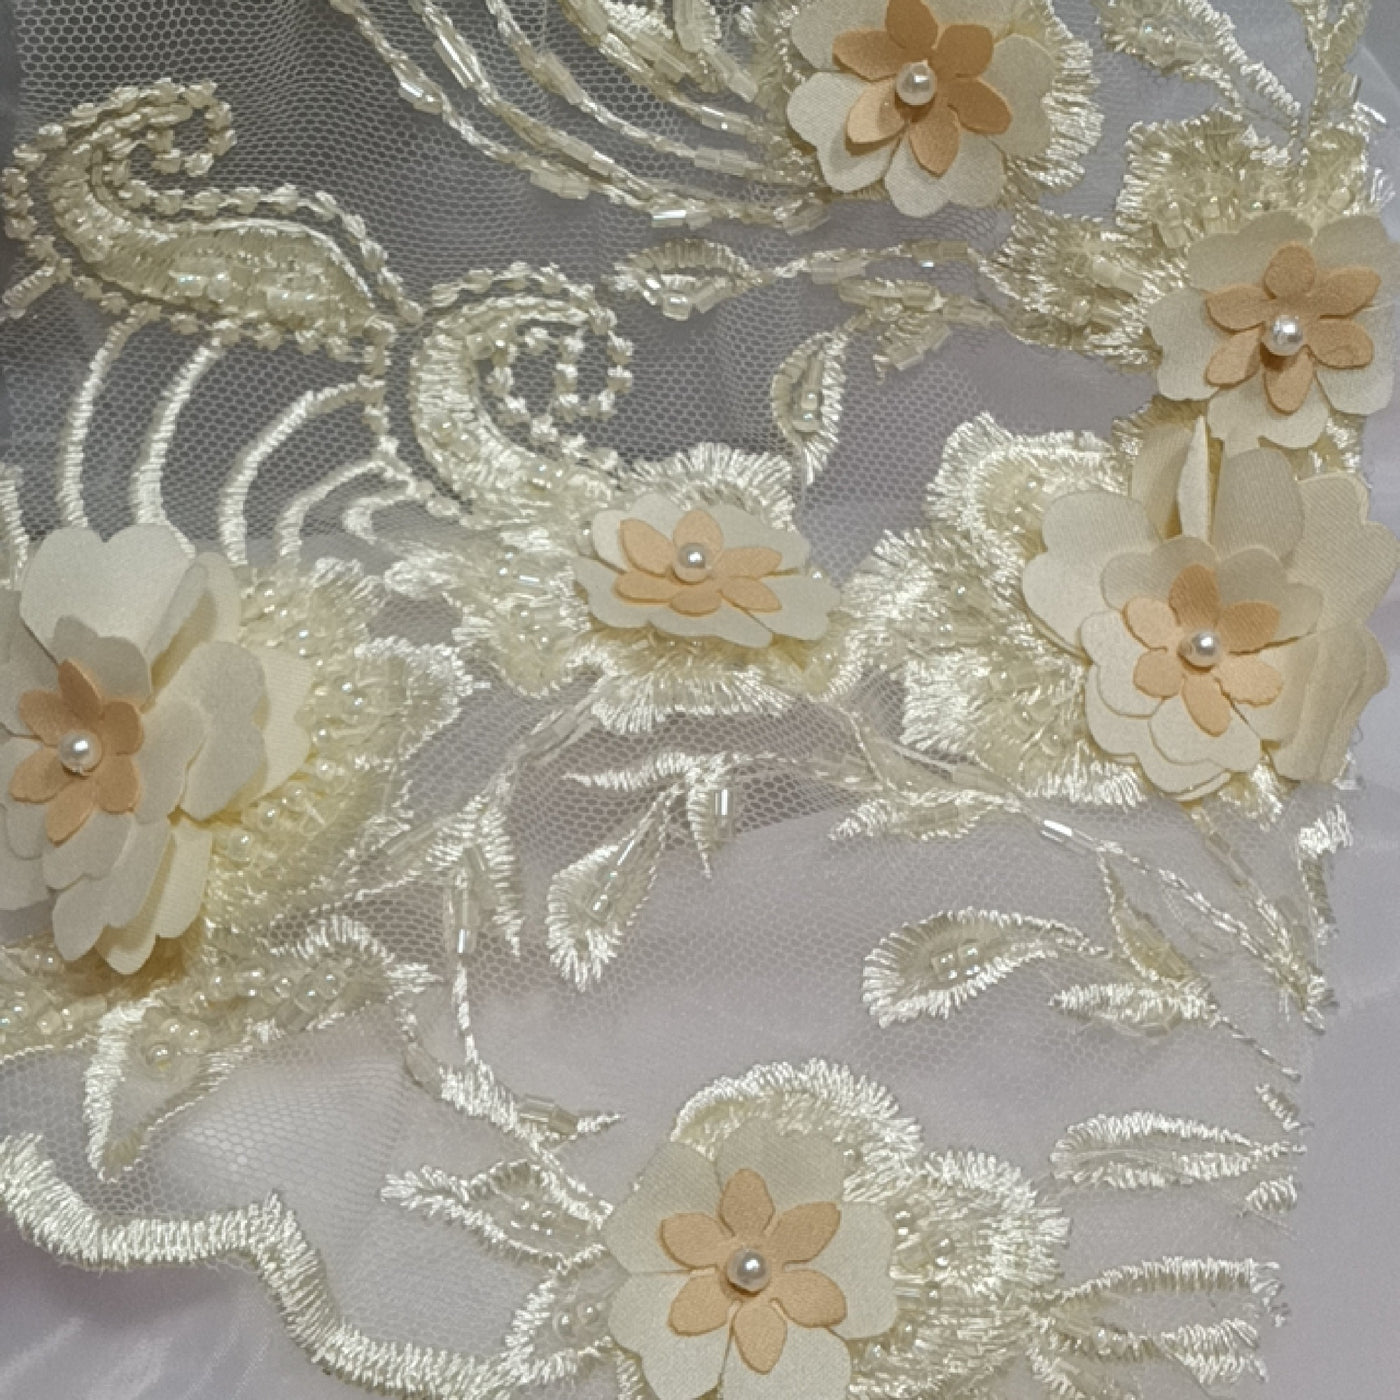 3D Floral Embroidered & Beaded Net Fabric with Beads. Lace Usa